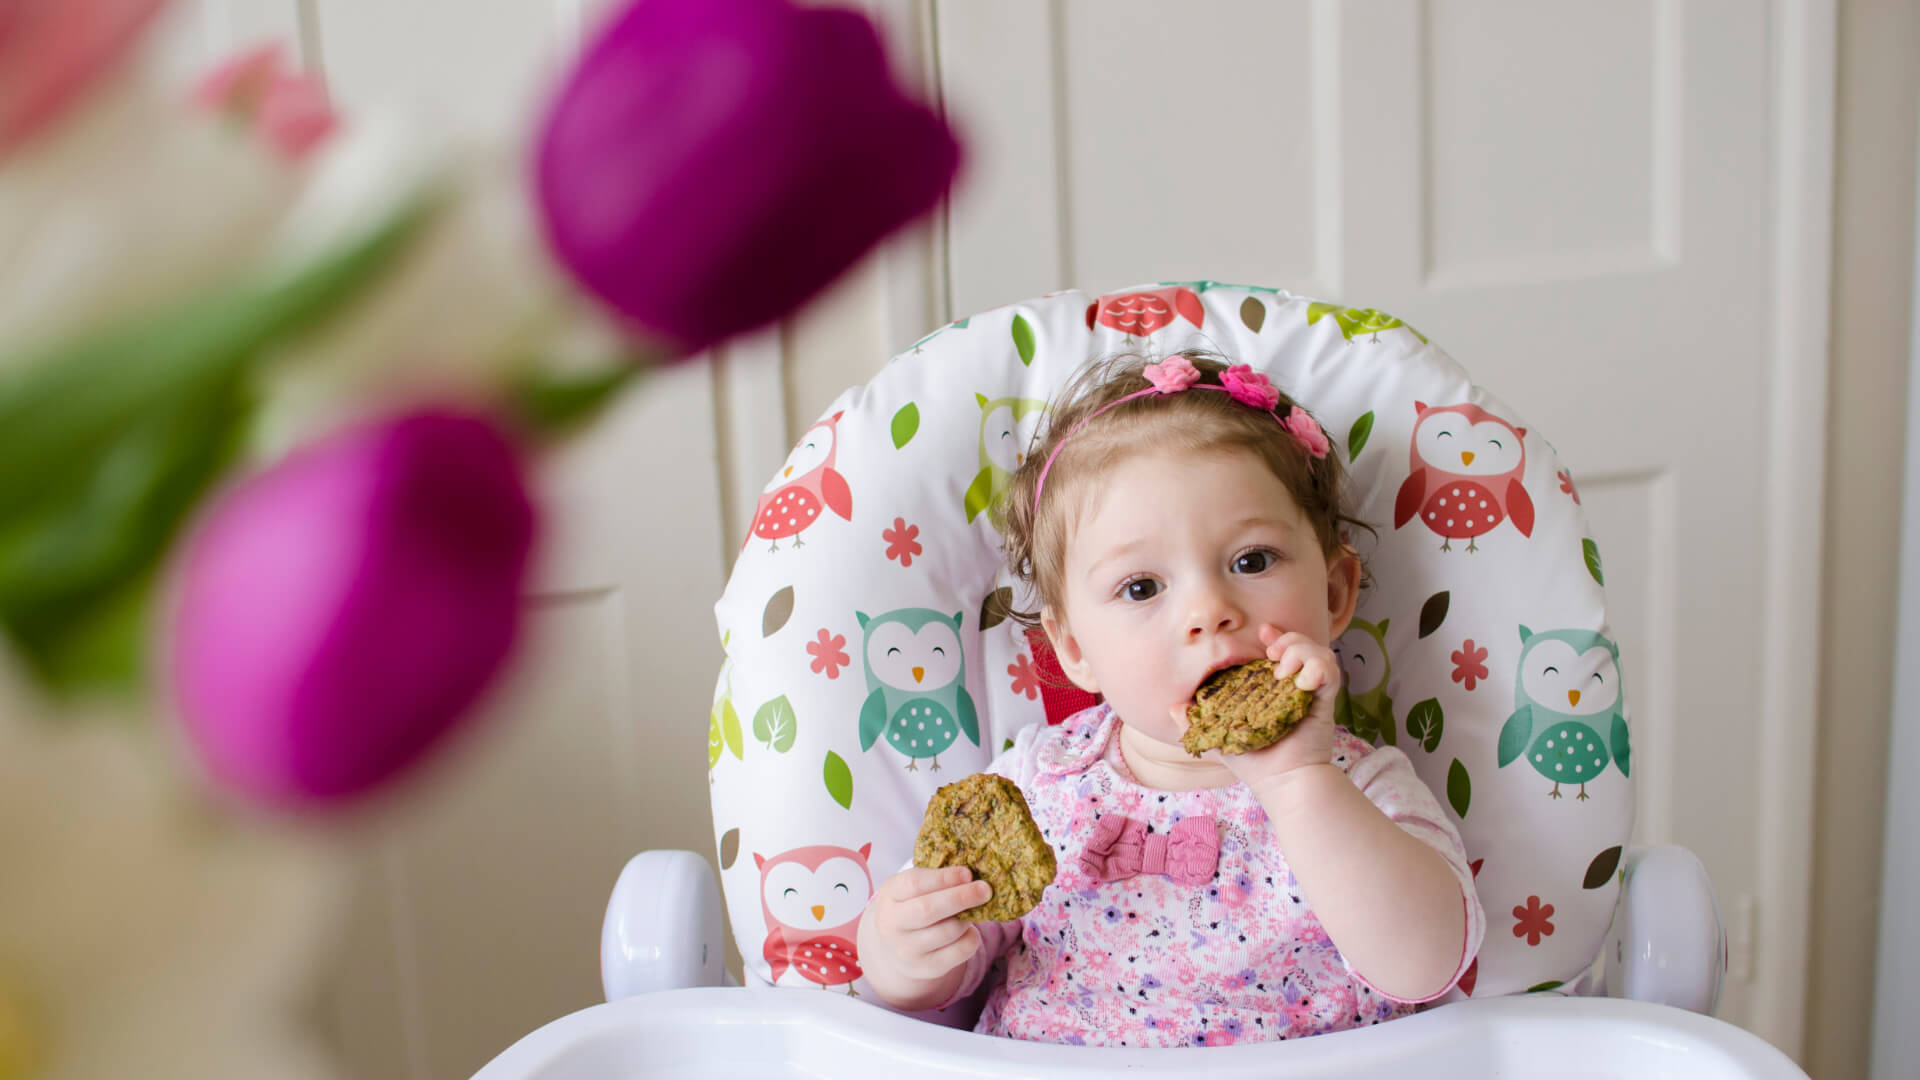 How to Start Baby Led Weaning